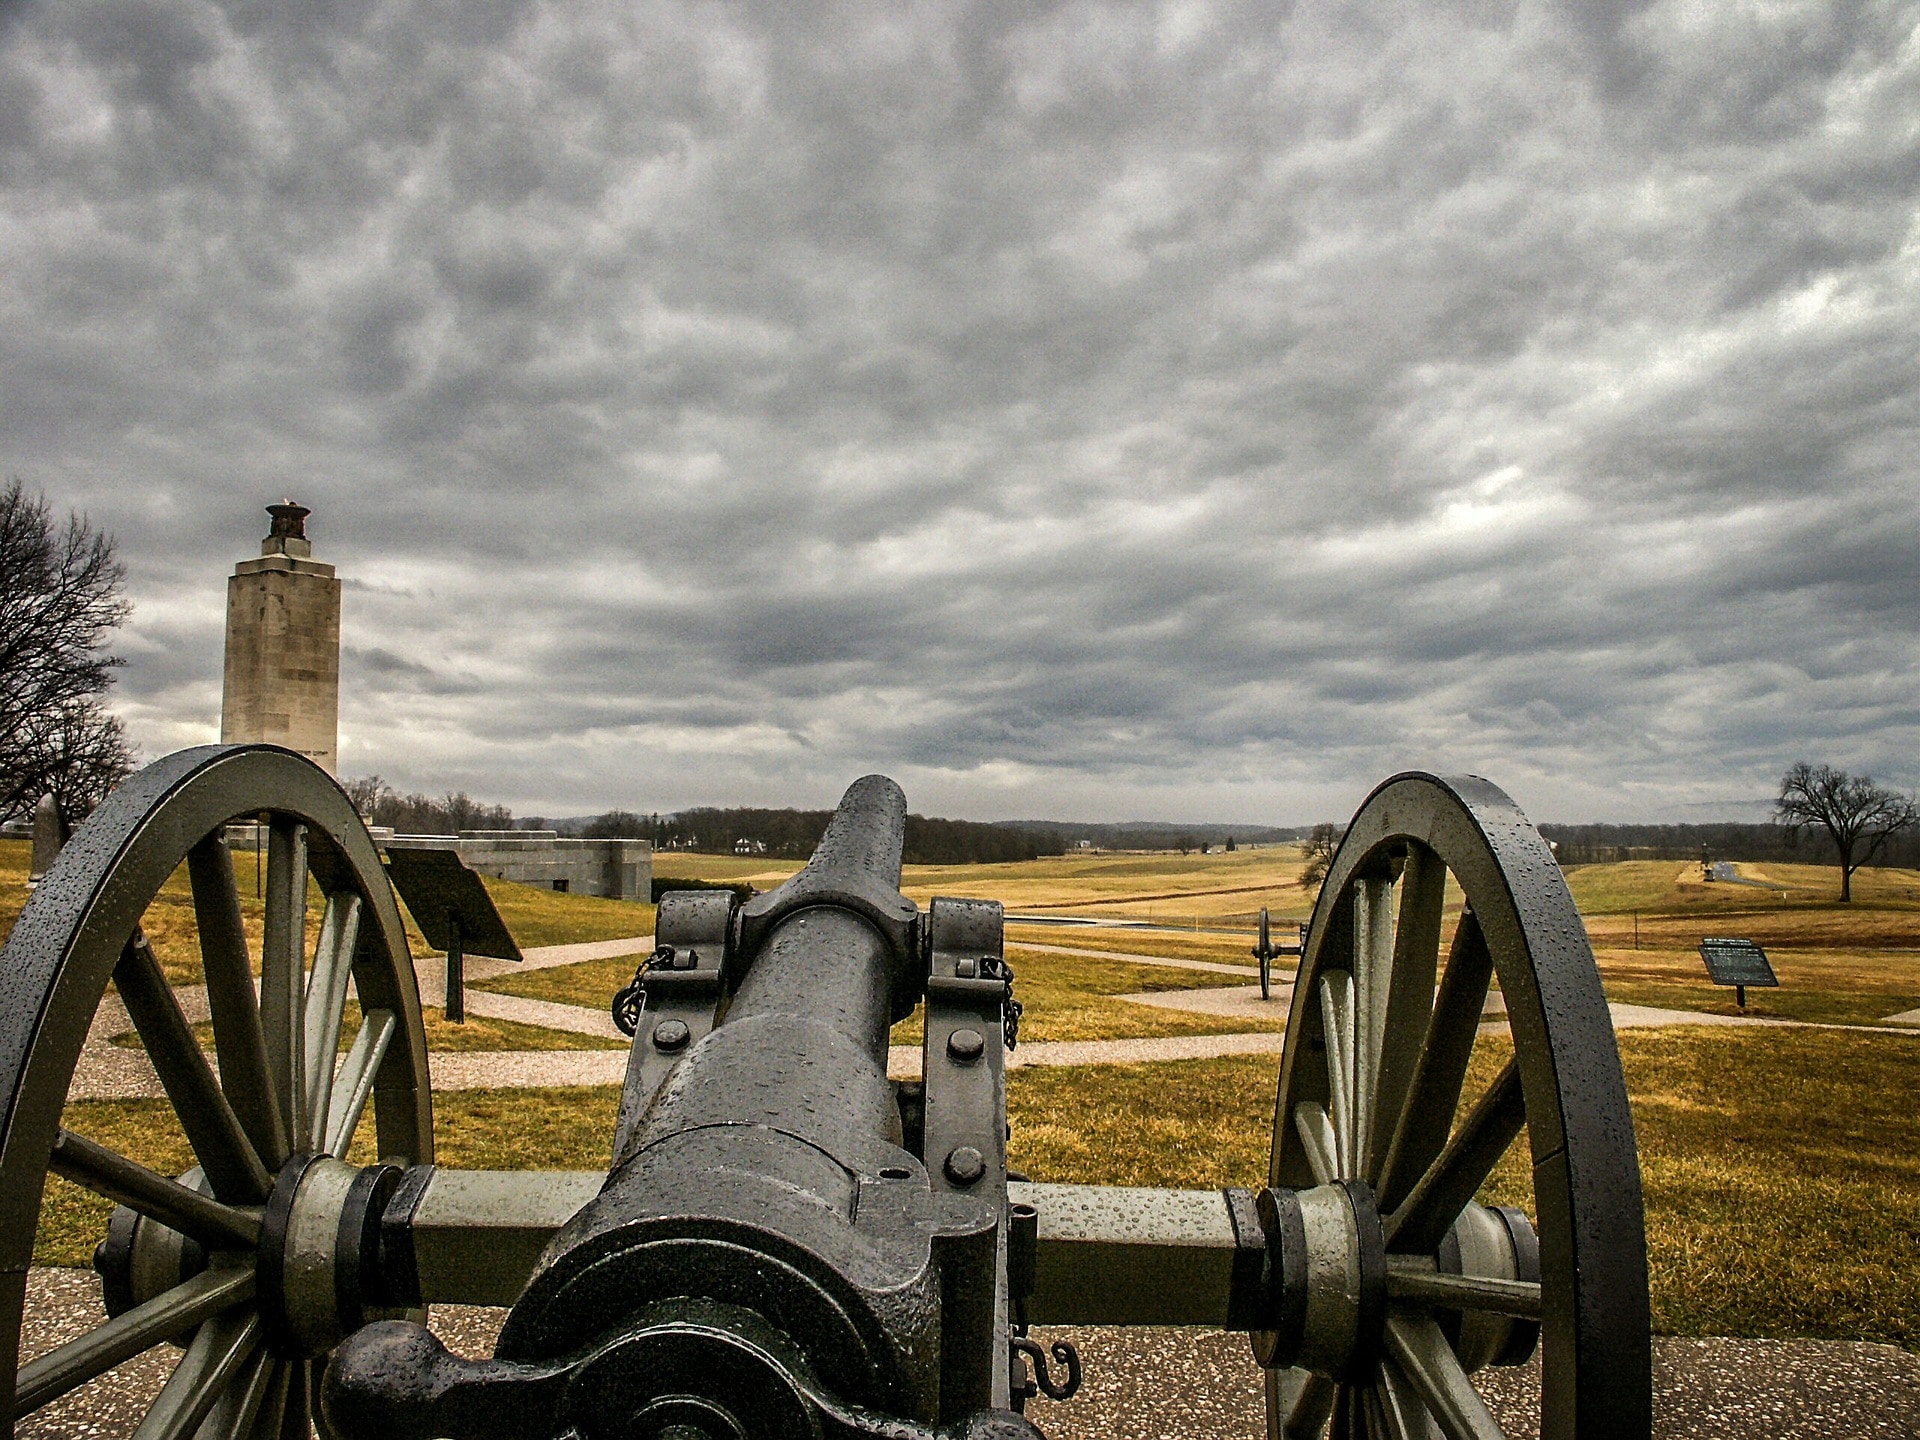 A lone cannon faces an empty battlefield under overcast skies.